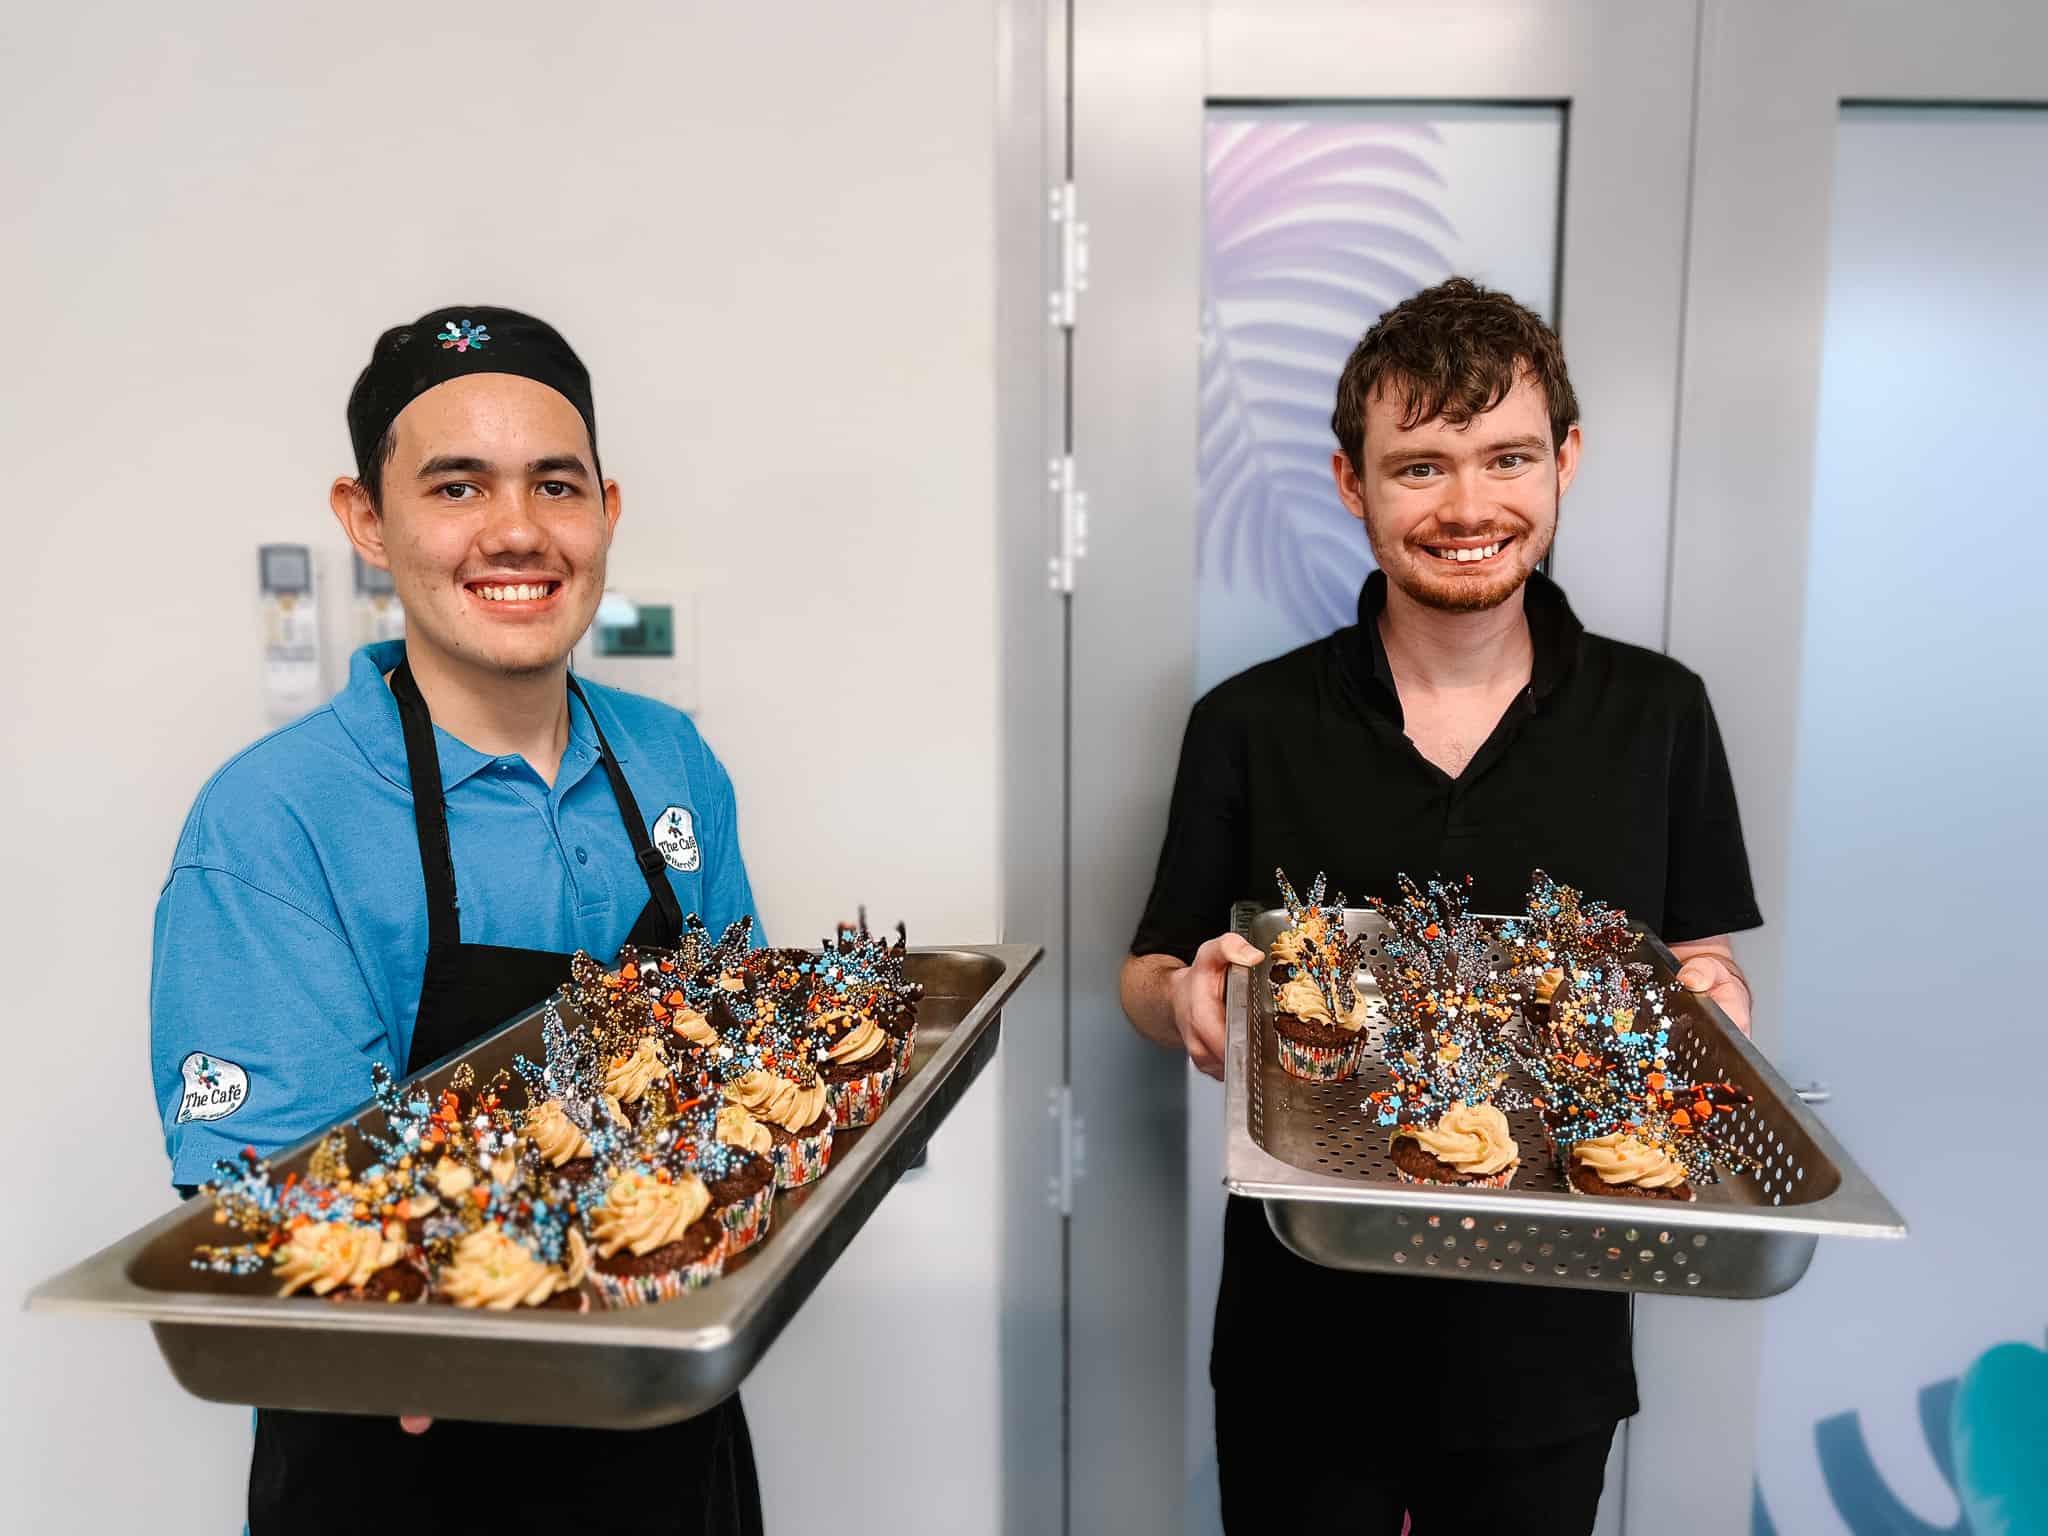 Two Cafe trainees hold trays of decorated cupcakes in the Cafe at Harry's Place.